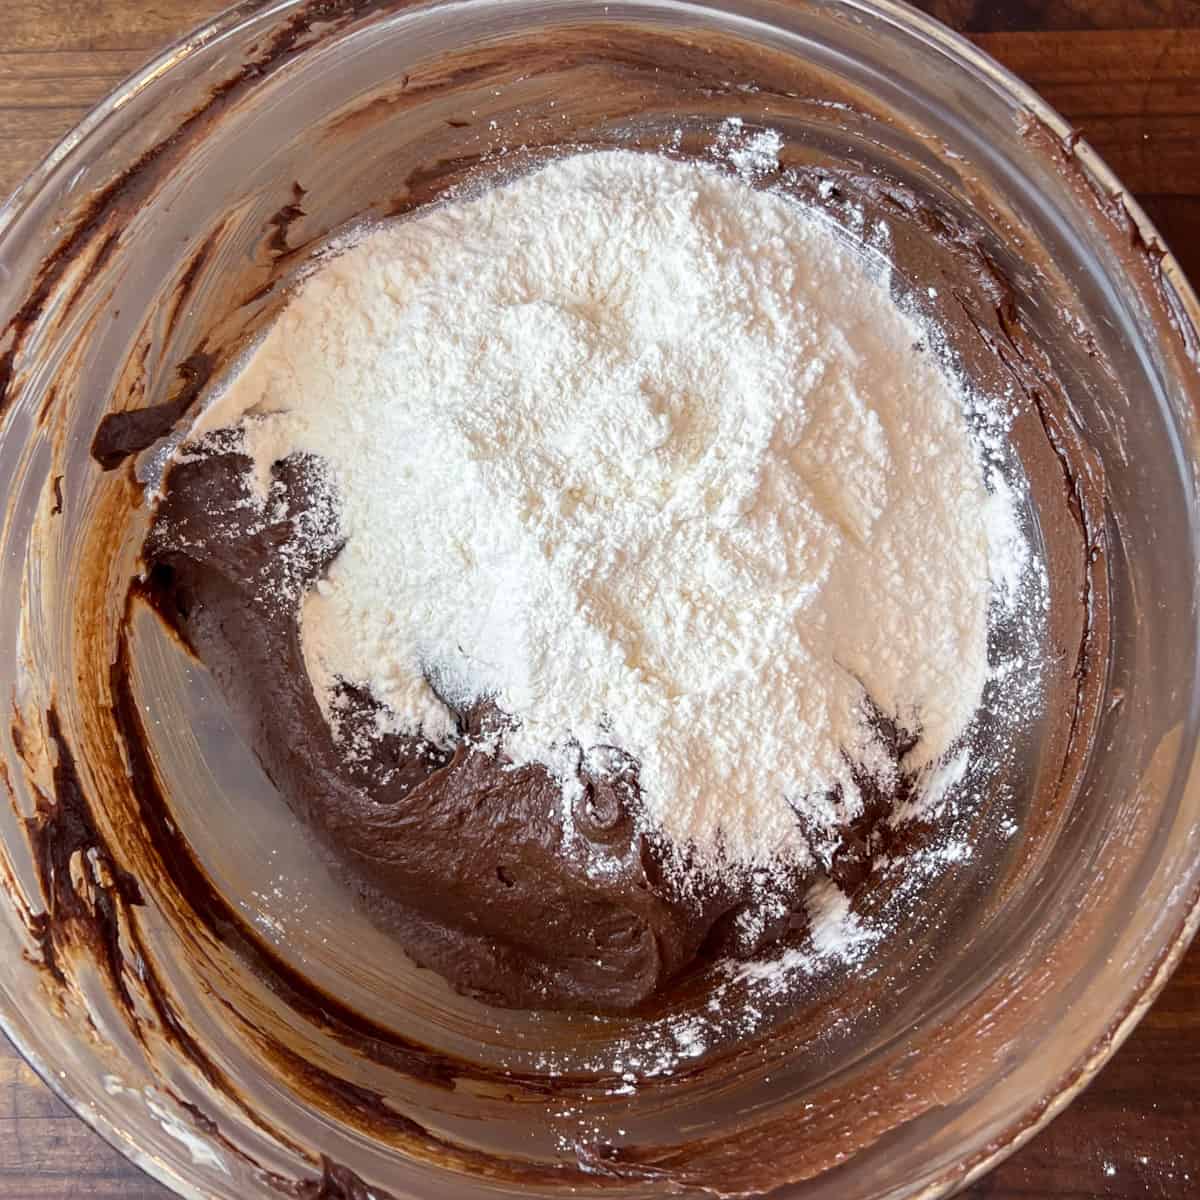 Chocolate batter with flour in a bowl.